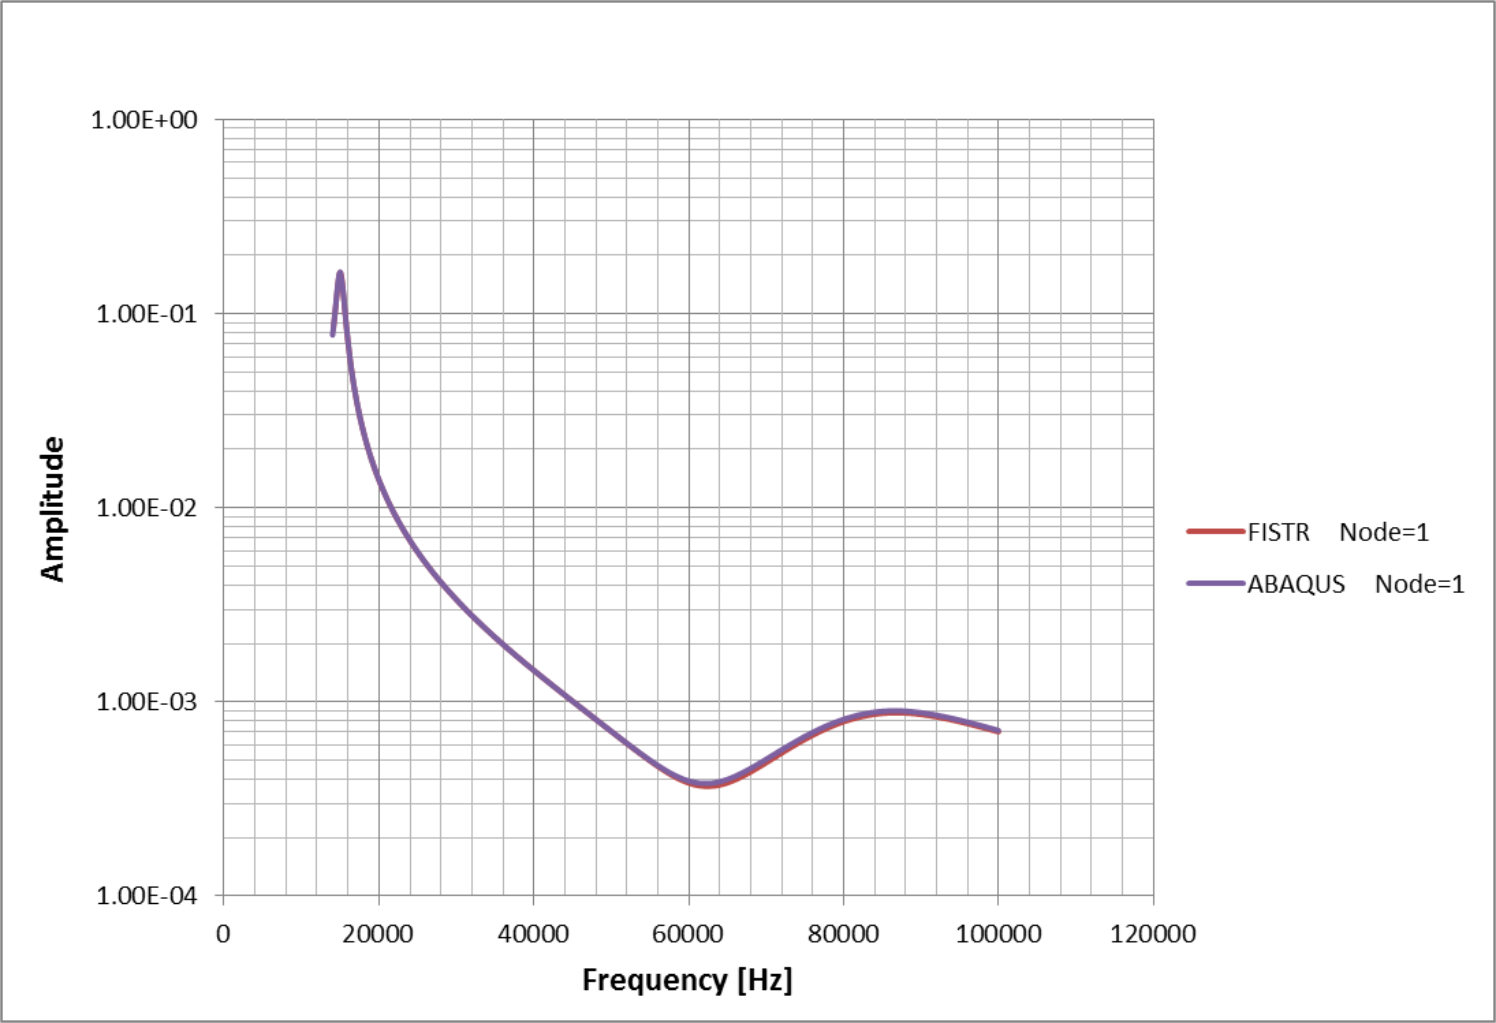 Frequency dependence of displacement strength of vibration points